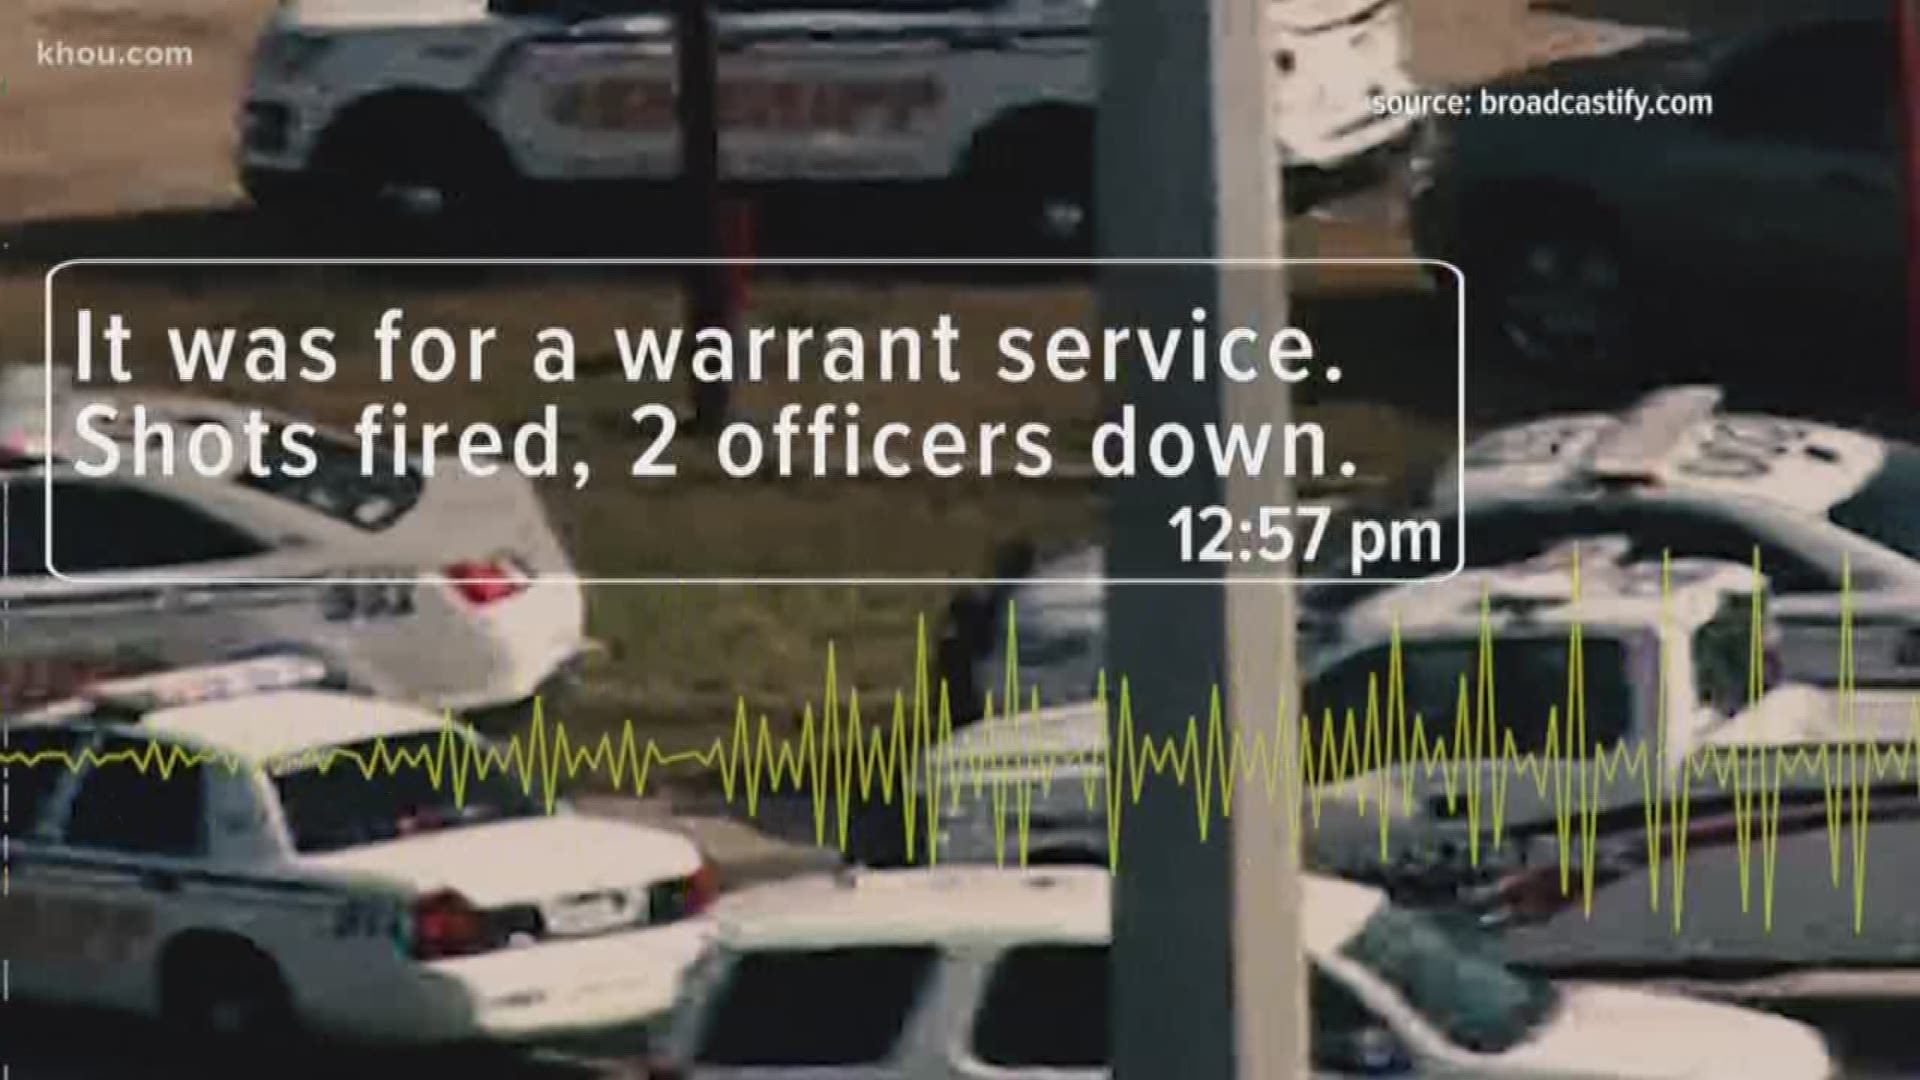 Three officers were shot in northeast Harris County while trying to serve a warrant. Police scanners reveal the tense moments when the officers were shot and called for help.